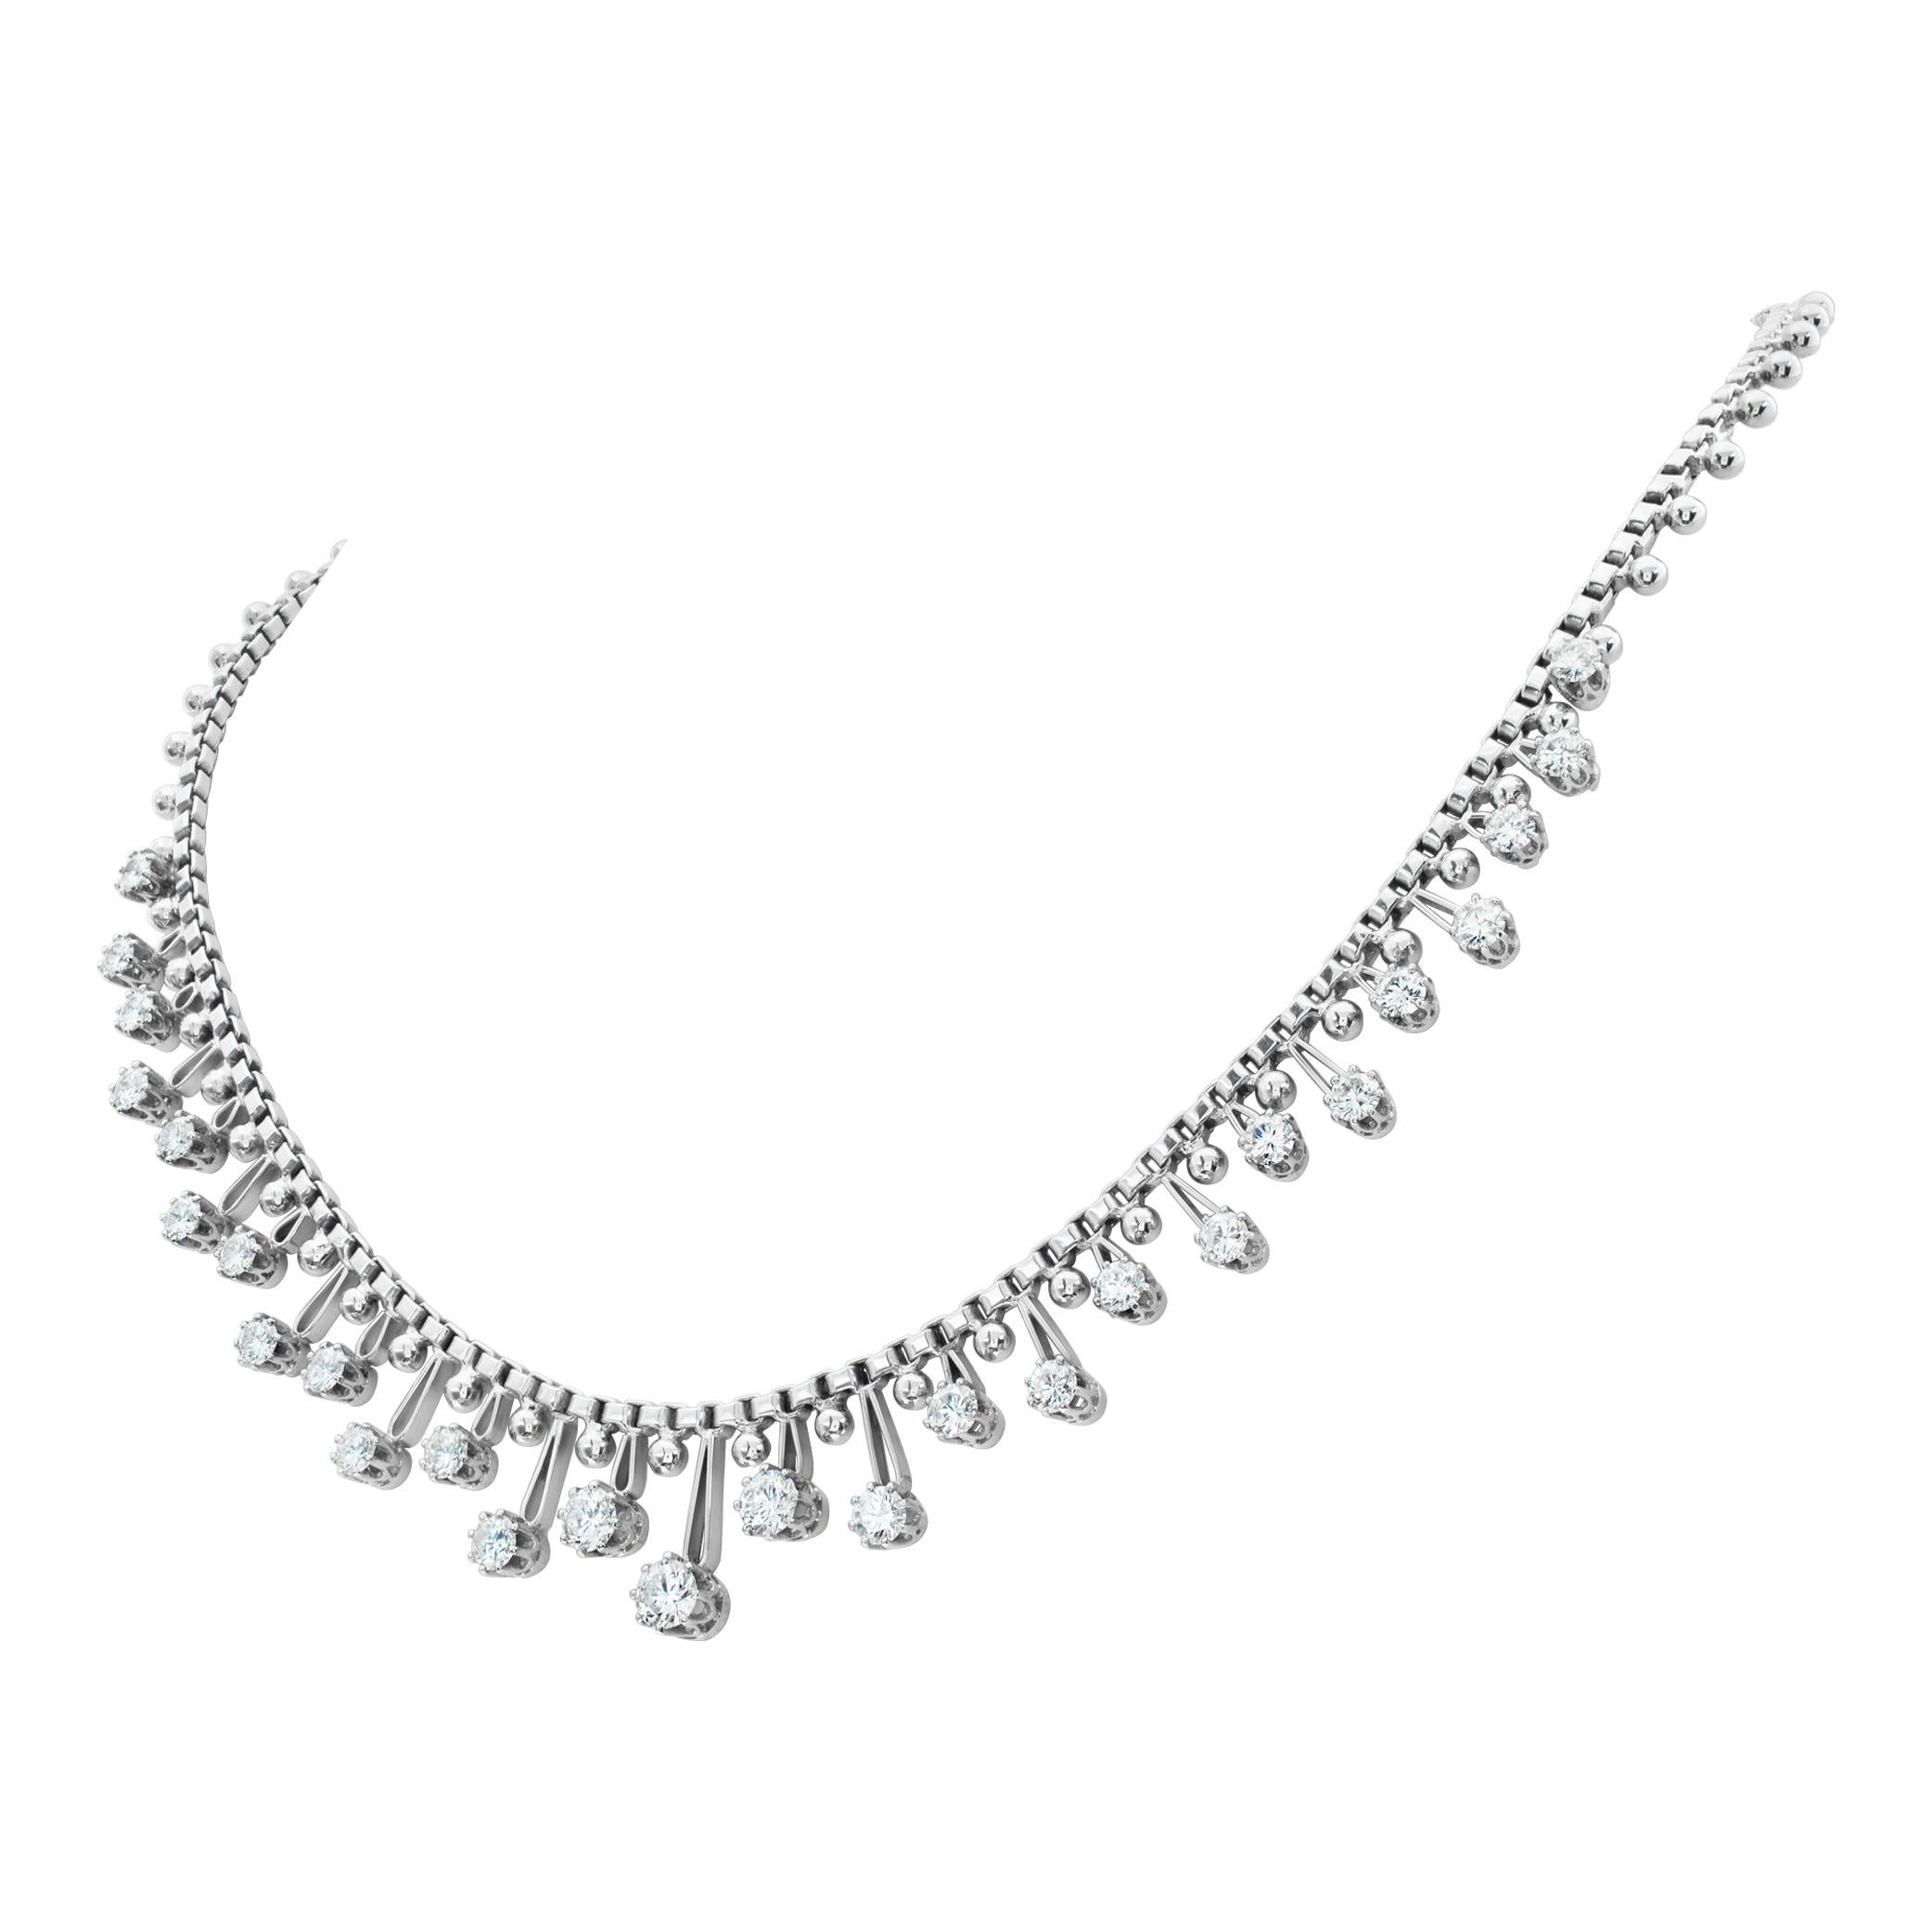 Diamond 18K white gold necklace  In Excellent Condition For Sale In Surfside, FL